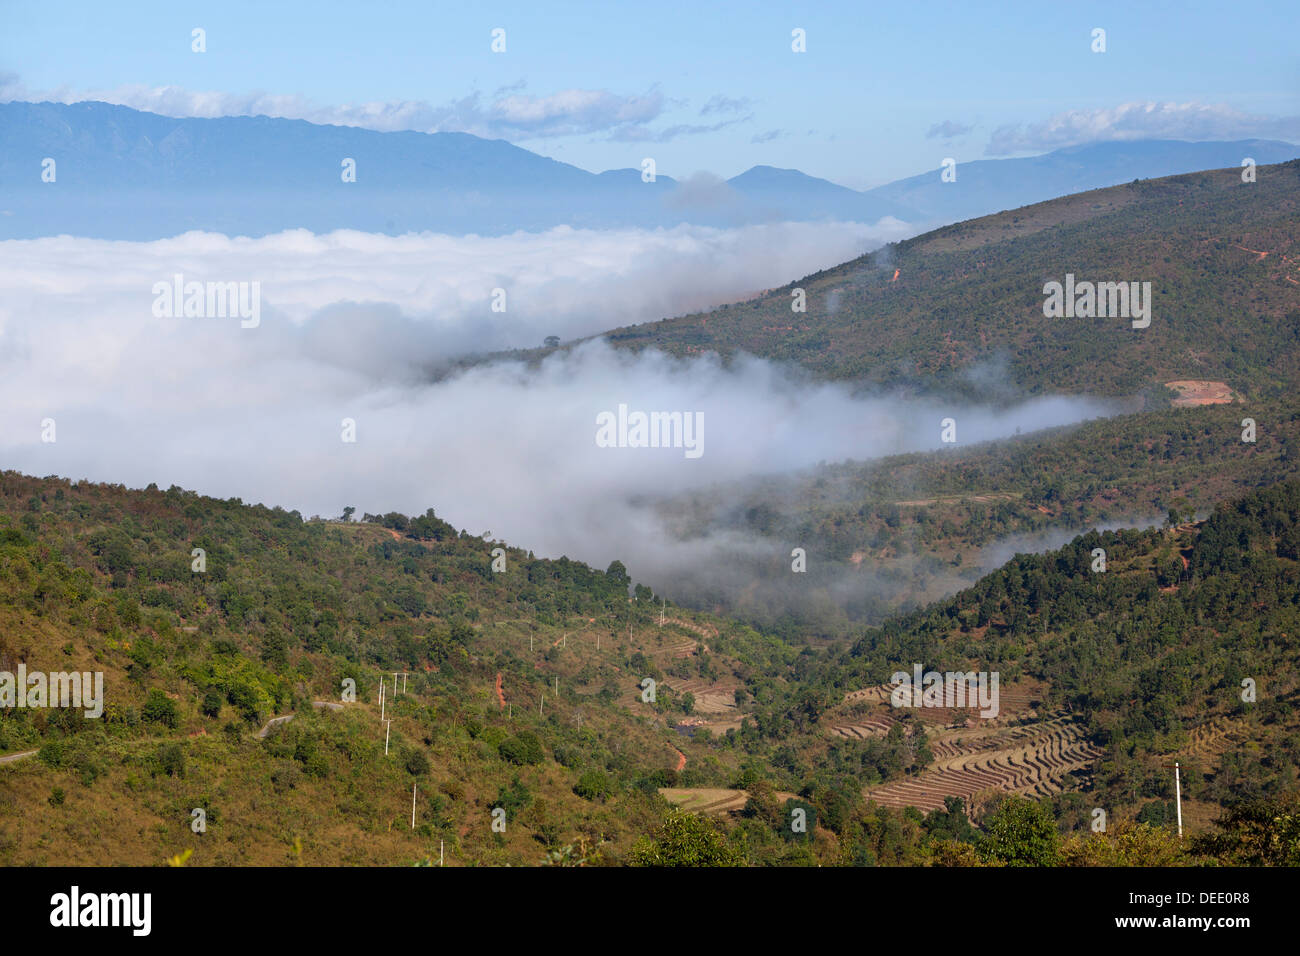 Morning fog over Kengtung and Shan hills on road to Loimwe, near Kengtung, Shan State, Myanmar (Burma), Asia Stock Photo